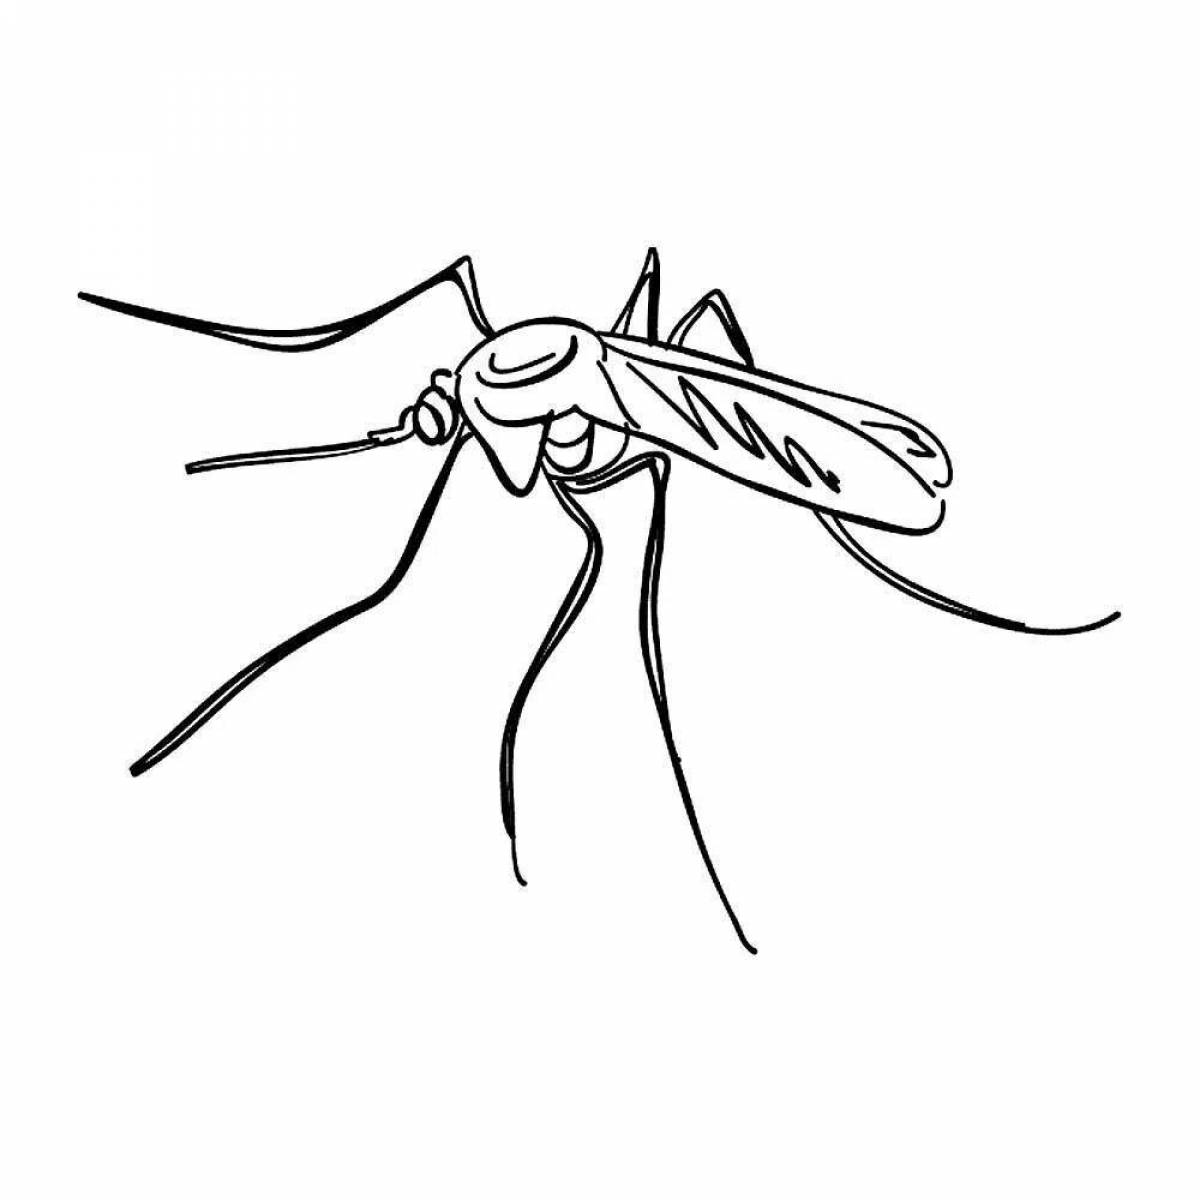 Playful mosquito coloring page for kids